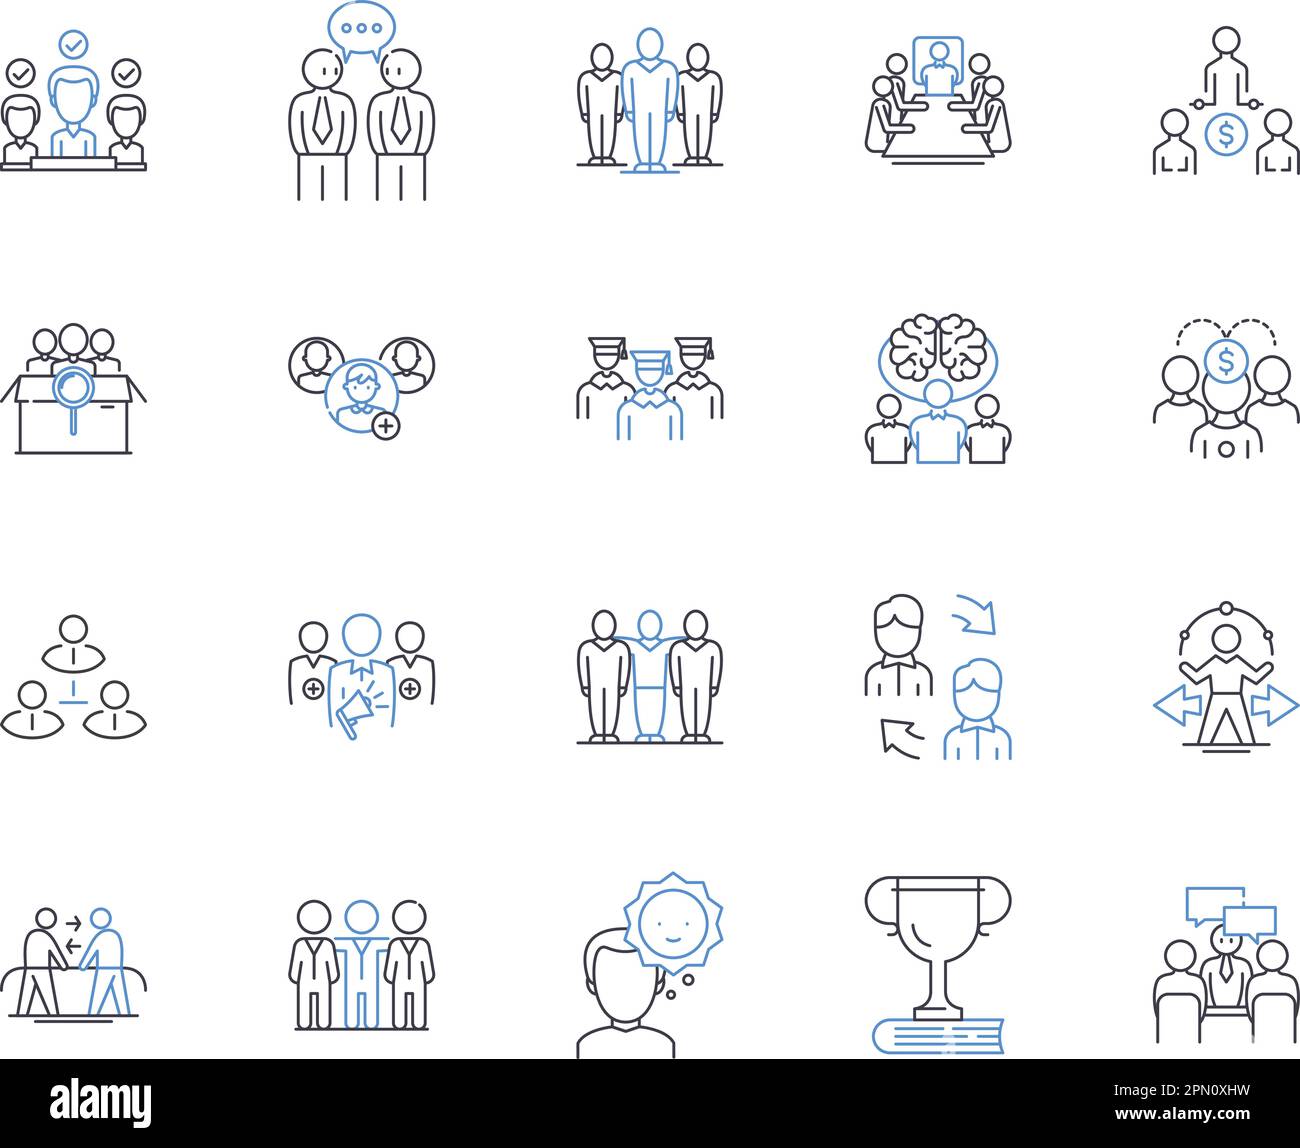 Coworkers outline icons collection. Colleagues, Collaborators, Teammates, Peers, Associates, Workmates, Comrades vector and illustration concept set Stock Vector